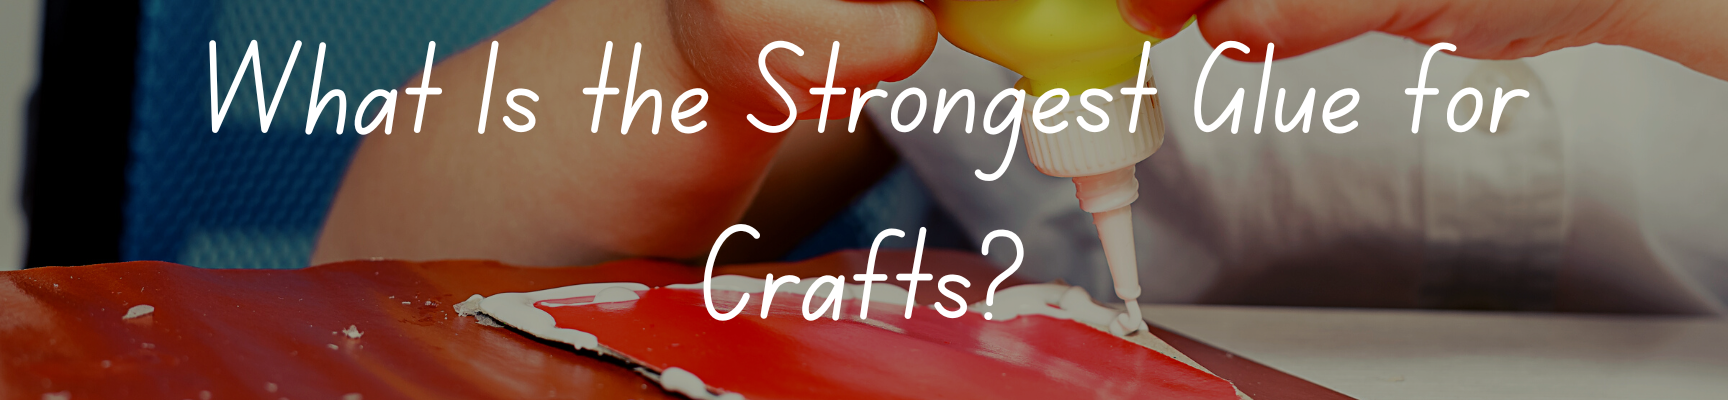 What Is the Strongest Glue for Crafts